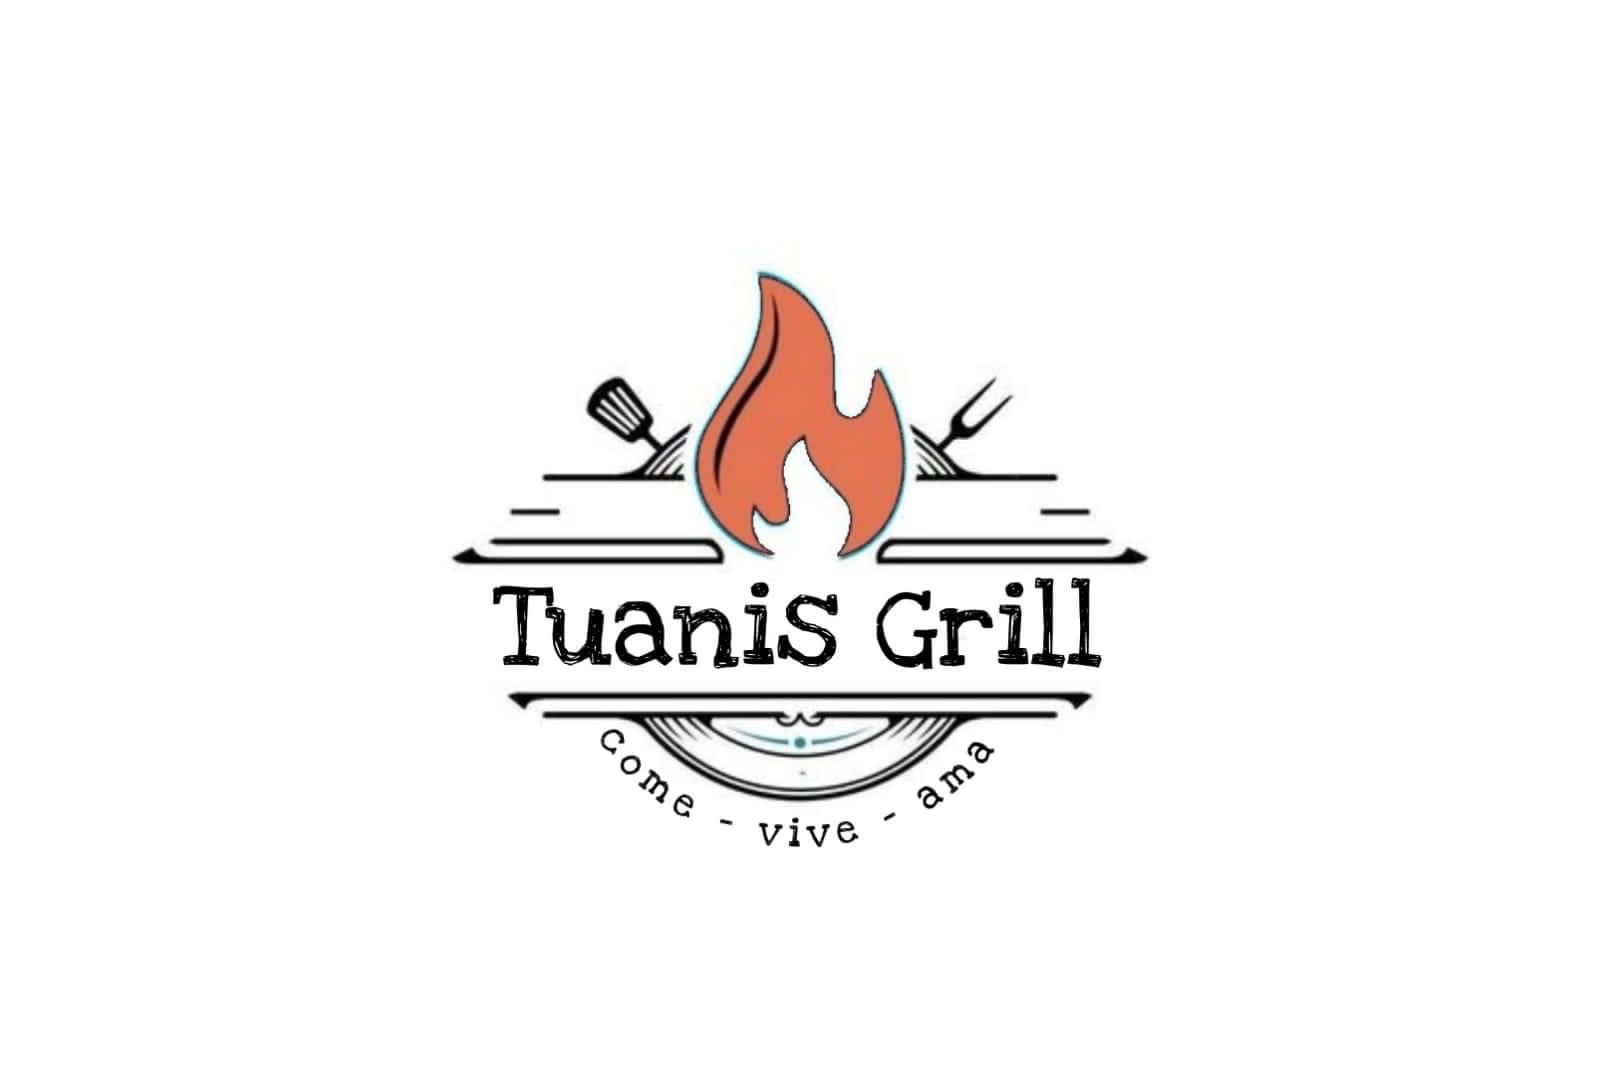 Tuanis Grill